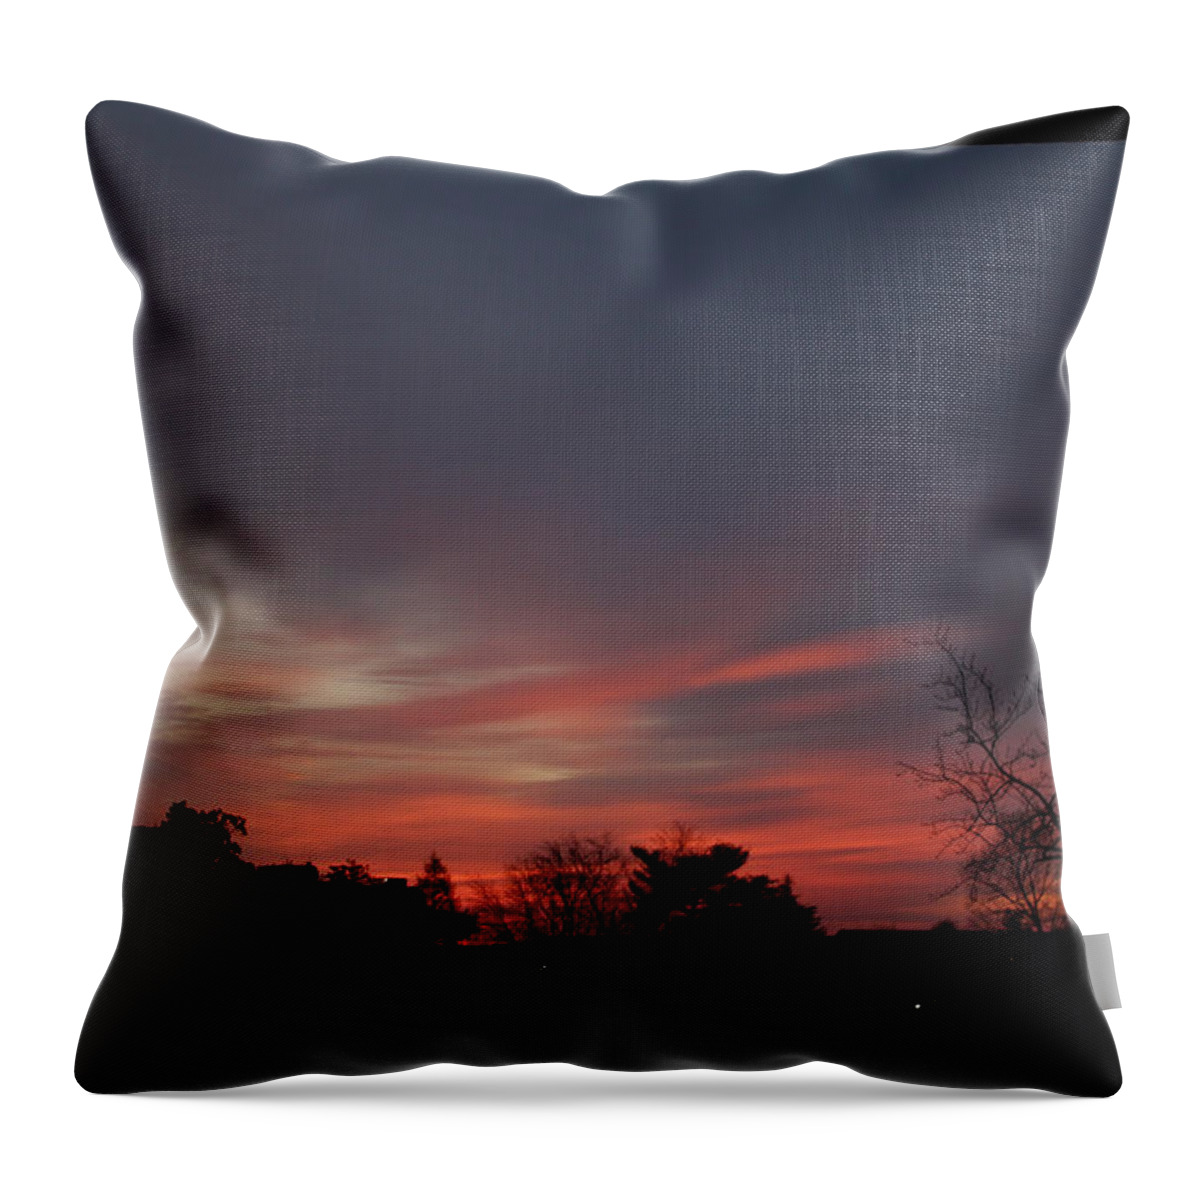 Morning Throw Pillow featuring the photograph Pink Morning After Sunrise February 17 2021 by Miriam A Kilmer